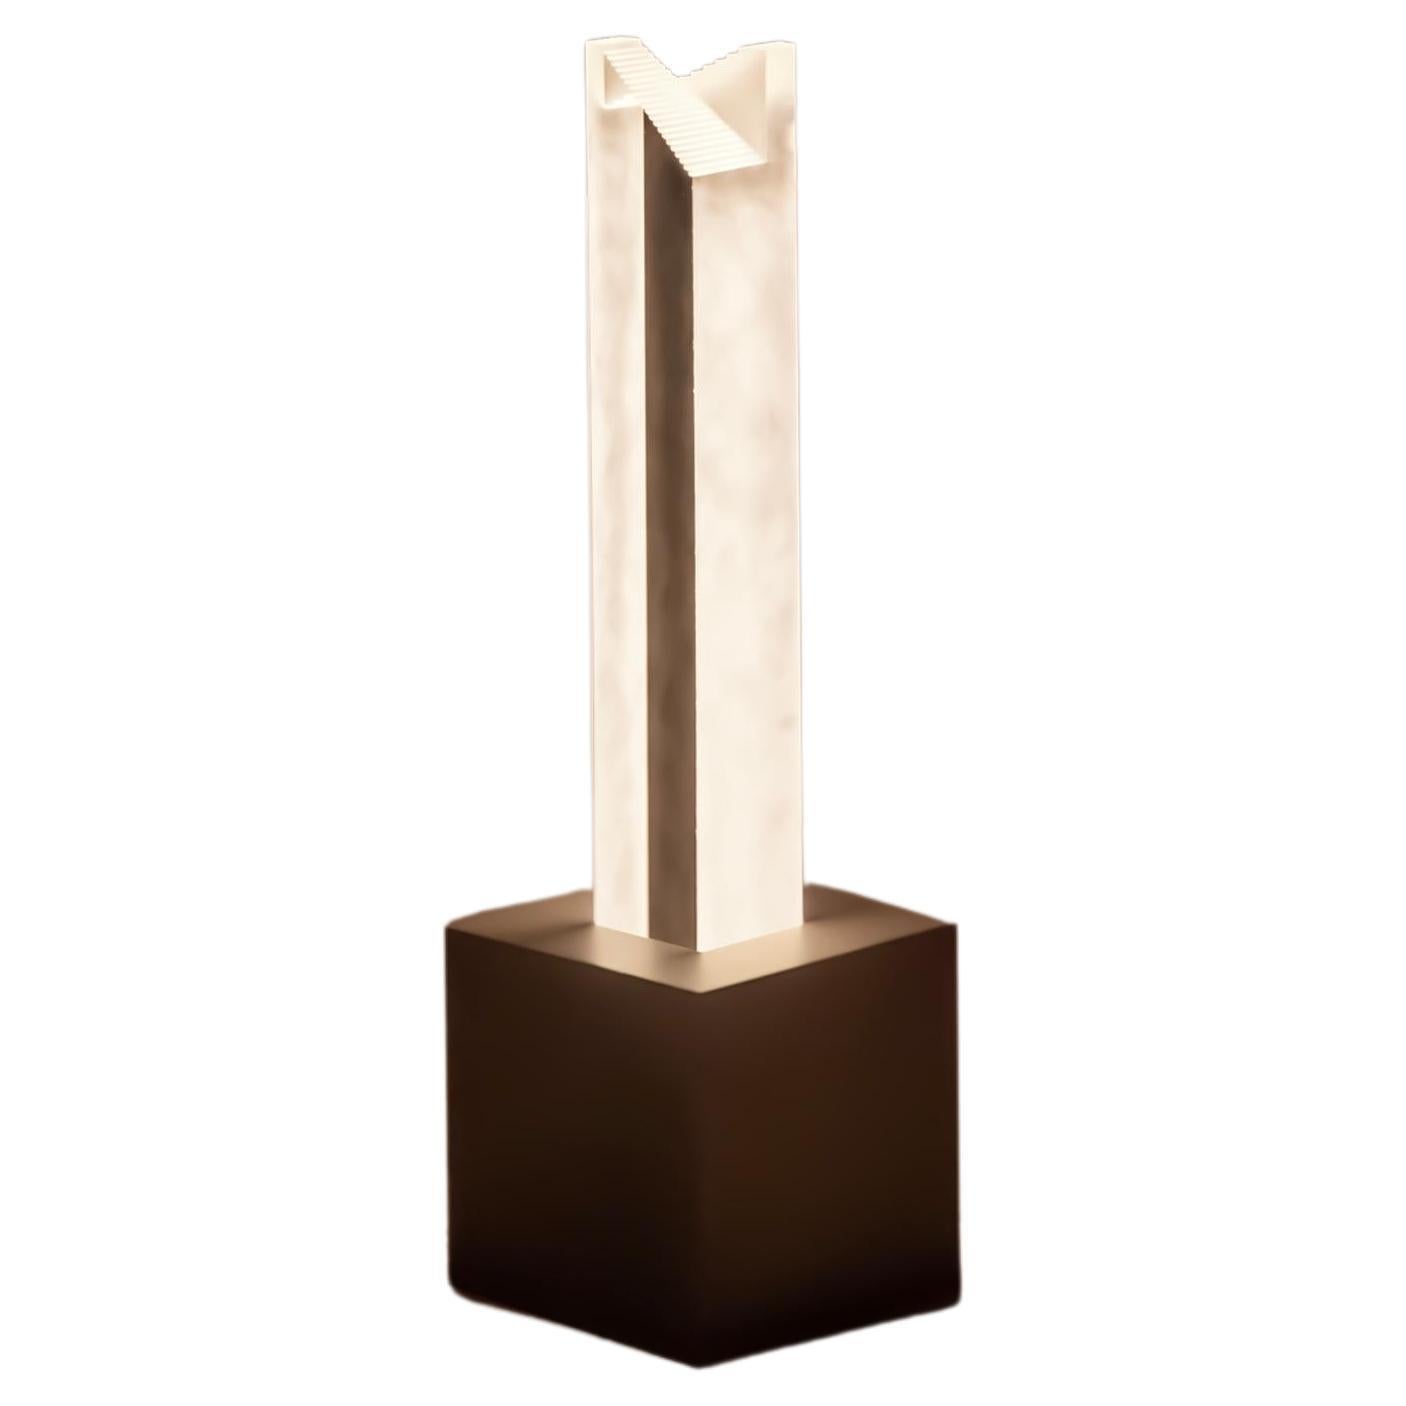 Obelisk I Floor Lamp by Yonathan Moore, Represented by Tuleste Factory